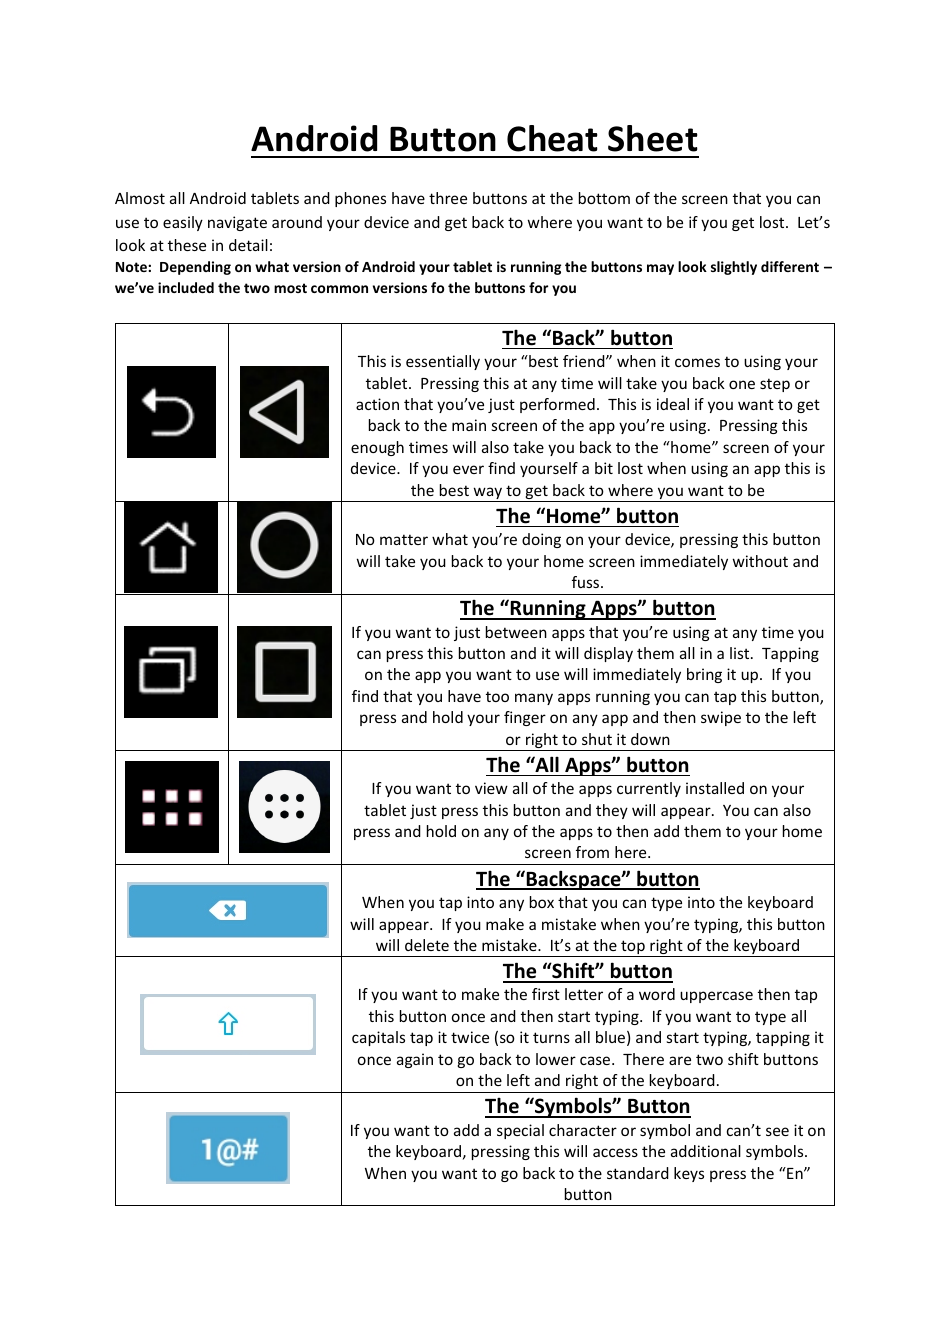 Android Button Cheat Sheet for Tablets and Phones, Page 1